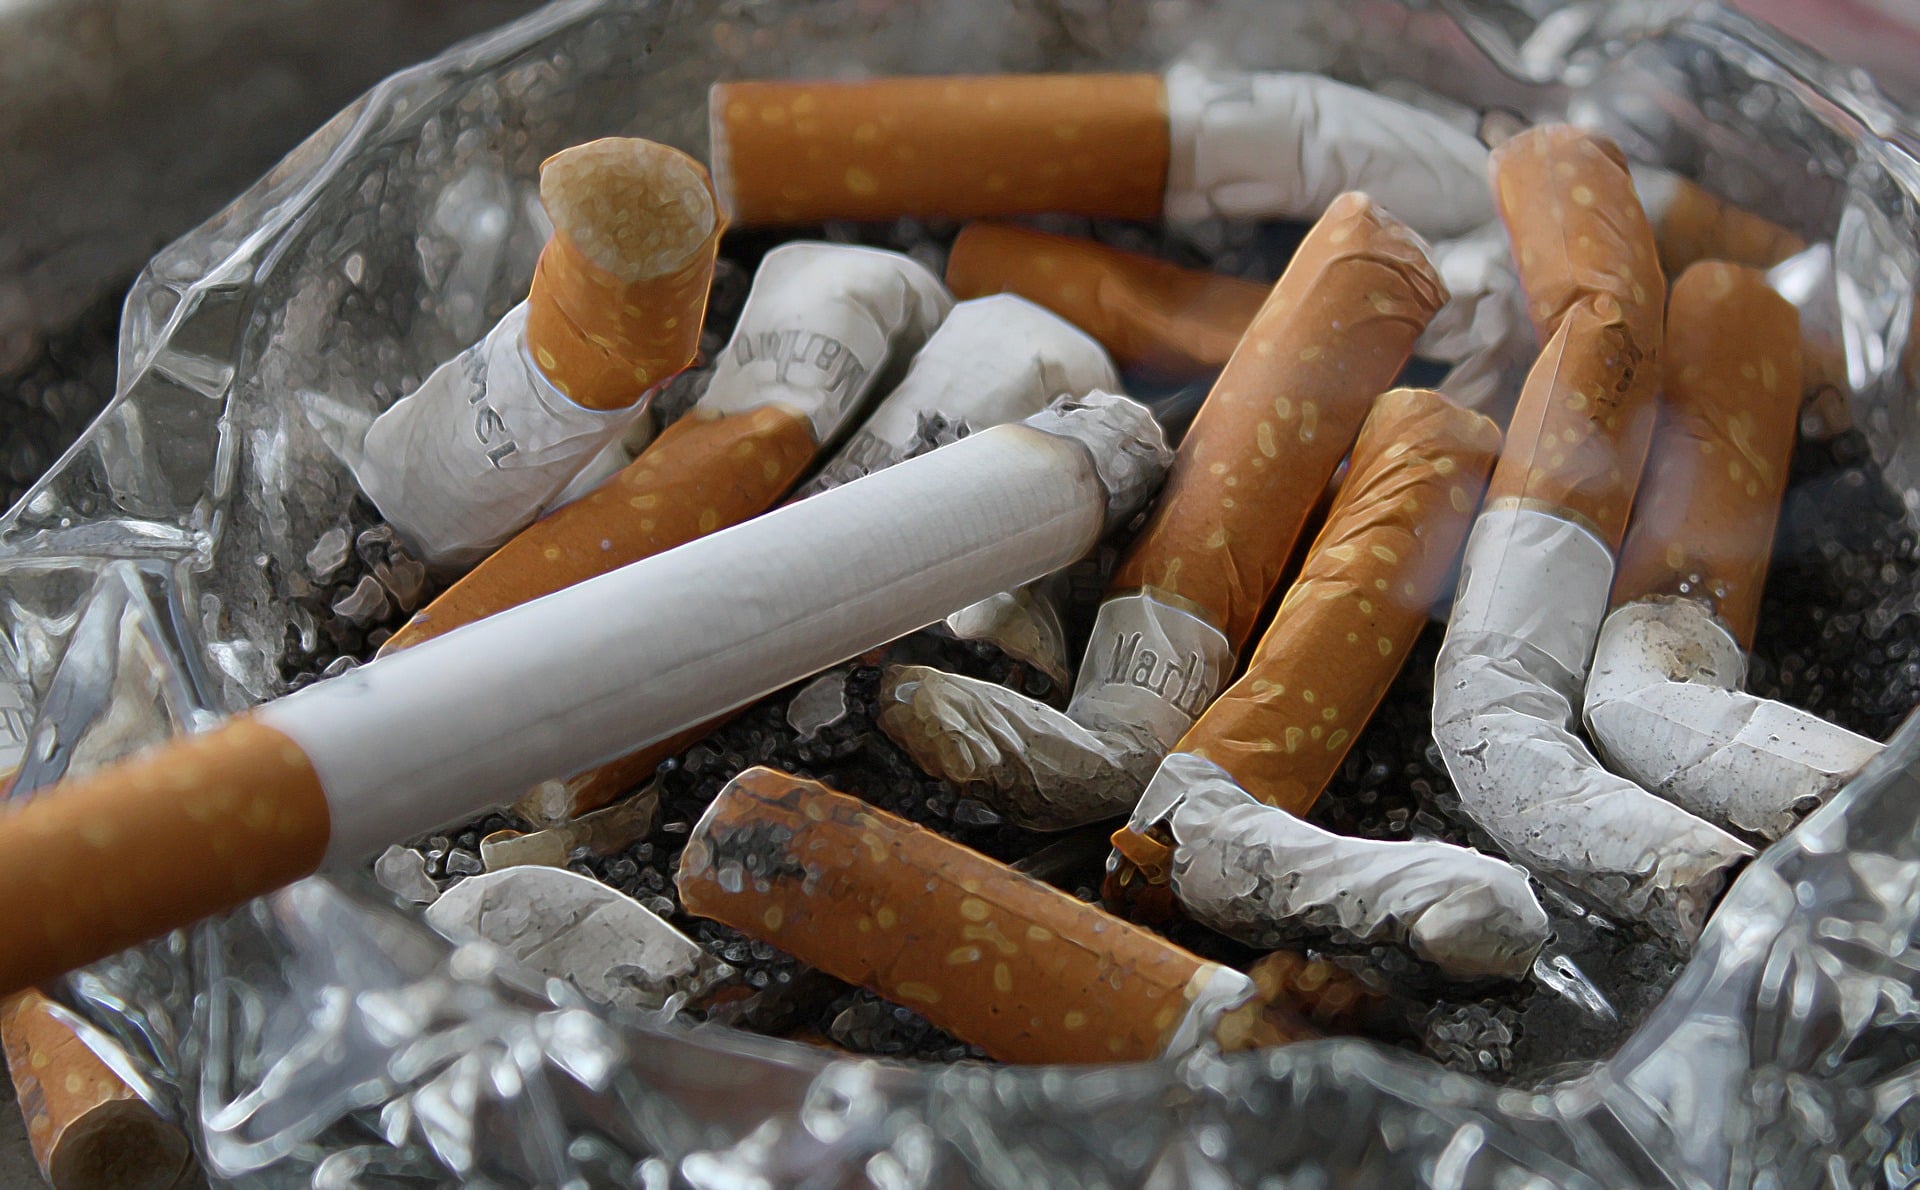 Economists and public health experts have welcomed the duty hike on cigarettes in this year's budget and pitched for higher taxes on more tobacco products to make them unaffordable and India tobacco-free in "Amrit Kaal".